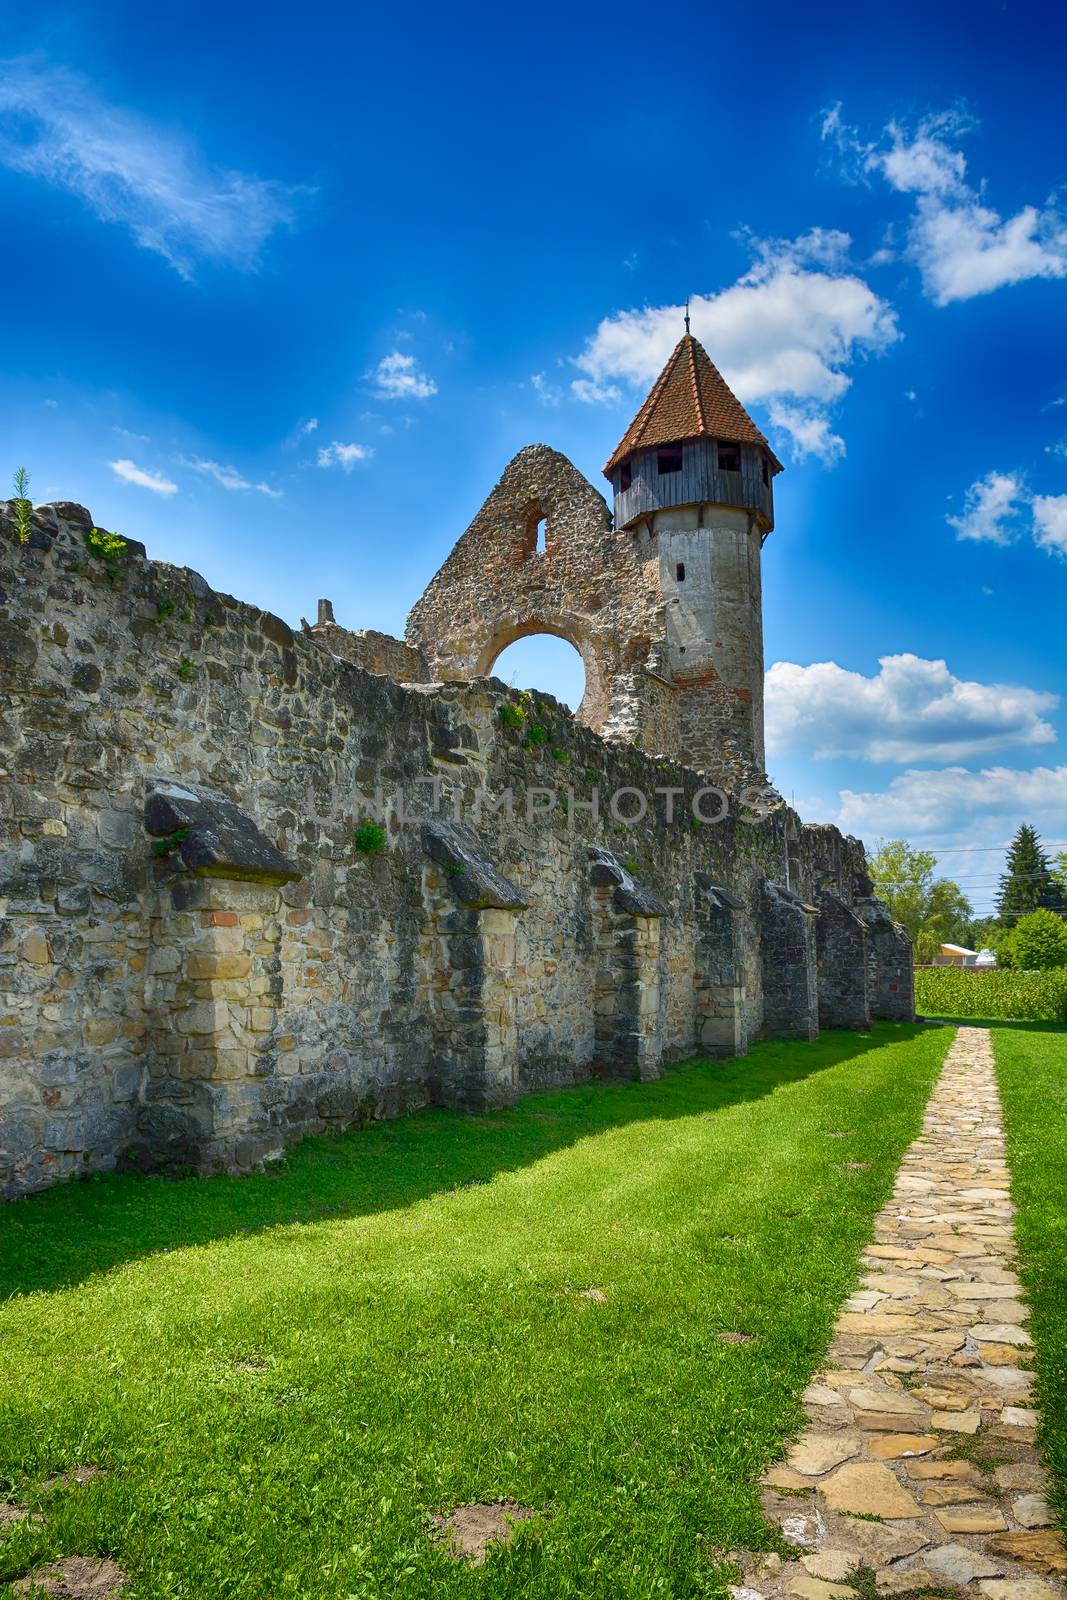 Carta Monastery is a former Cistercian (Benedictine) monastery in the Tara Fagarasului region in southern Transylvania. The monastery was probably founded in 1202-1206 by monks from Igri? abbey (daughter house of Pontigny abbey) by constantinhurghea